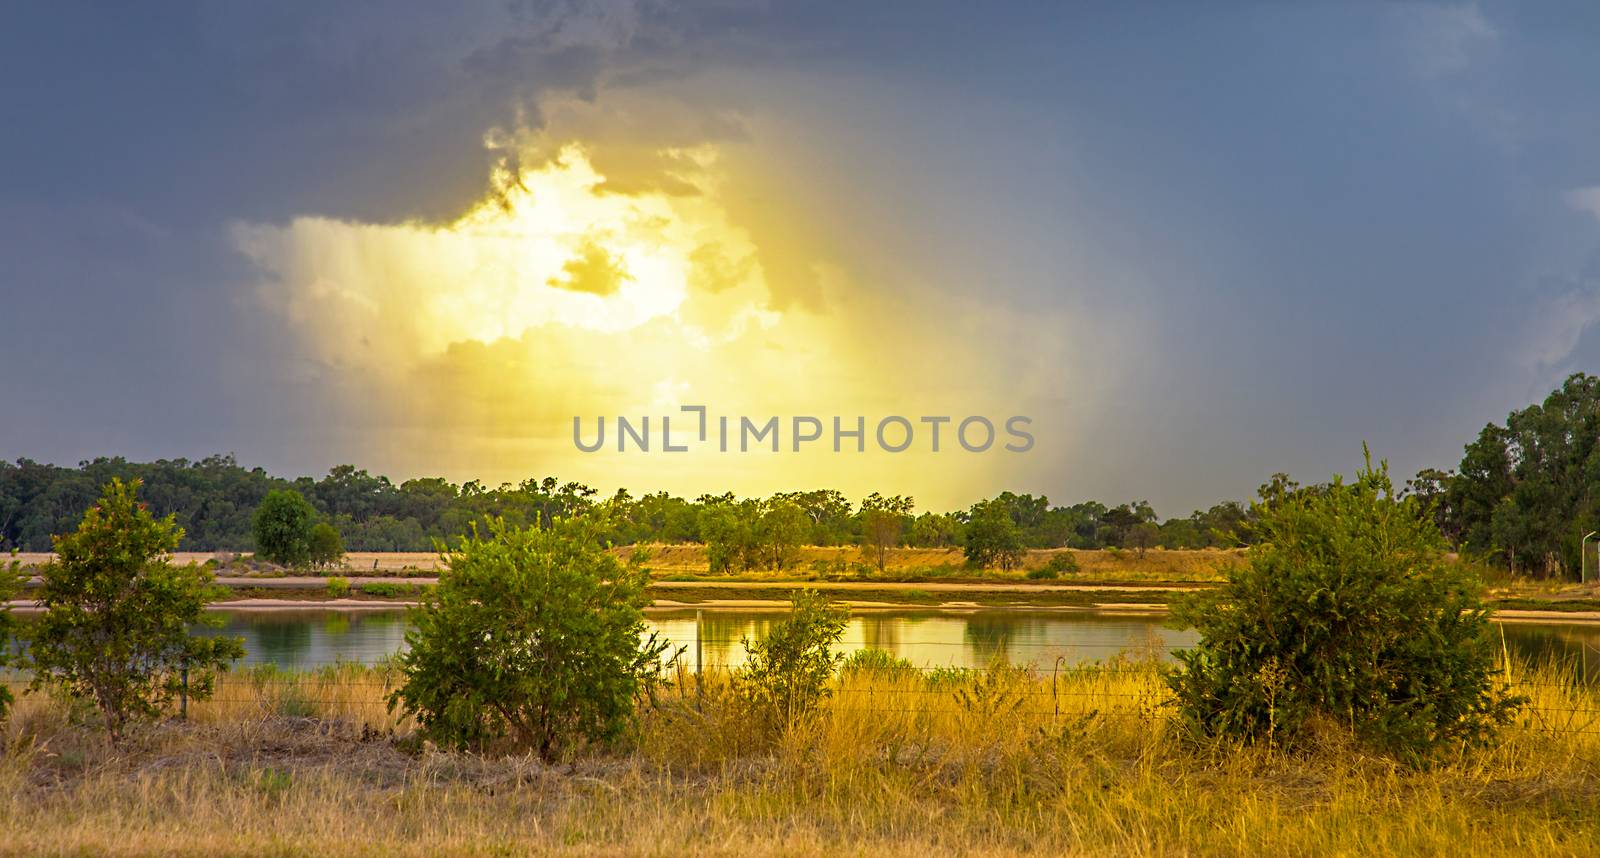 Thunderstorm in the outback at Dubbo New South Wales Australia by Makeral